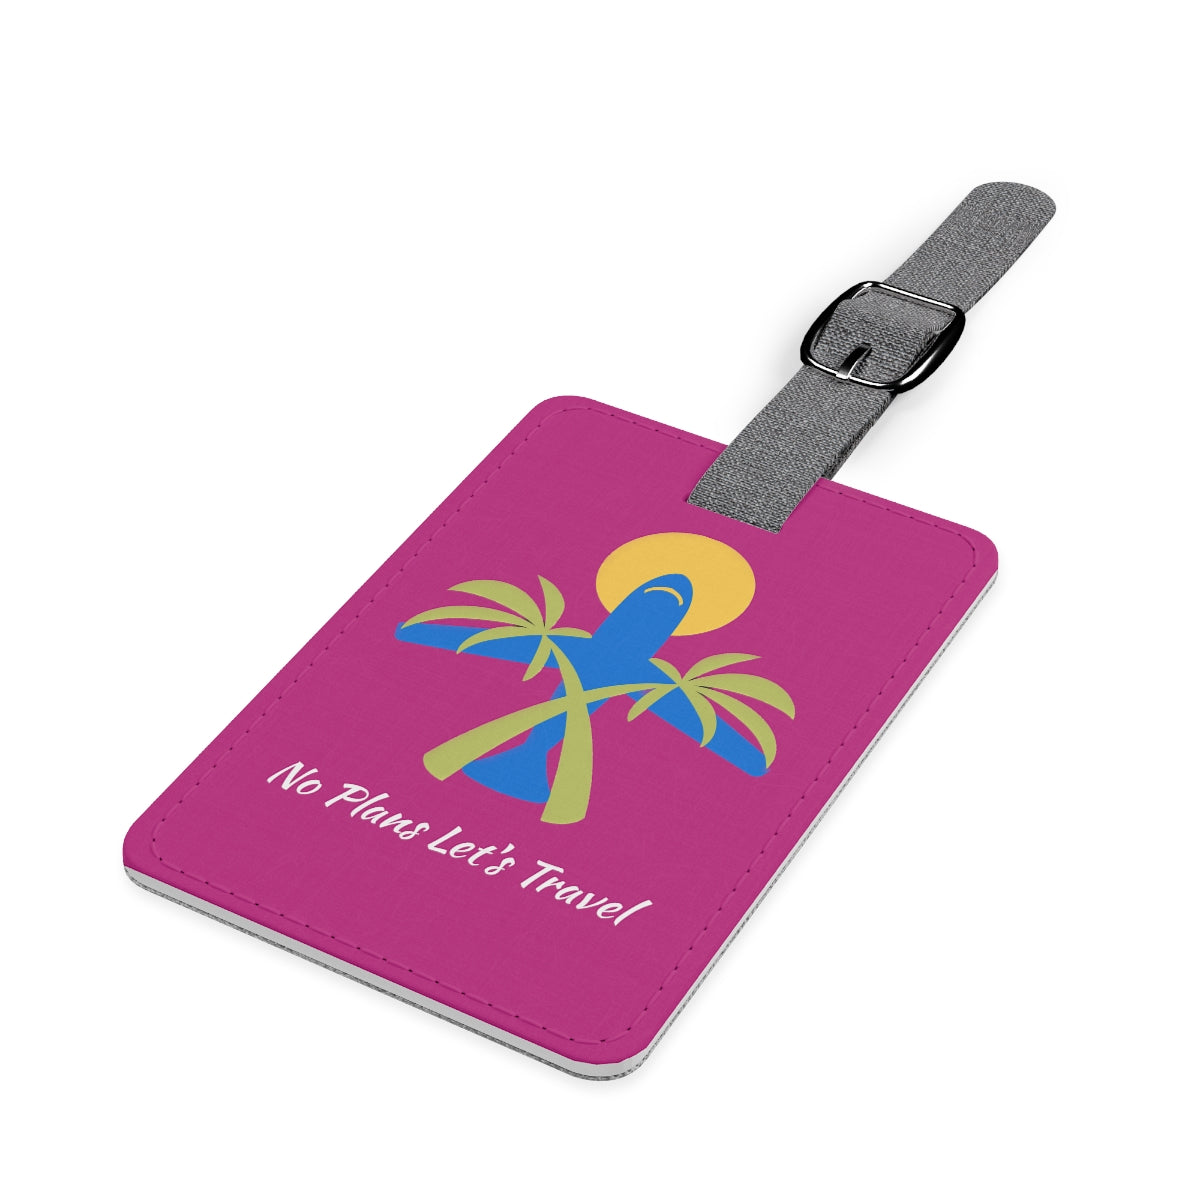 (Pink) No Plans Let's Travel Luggage Tag